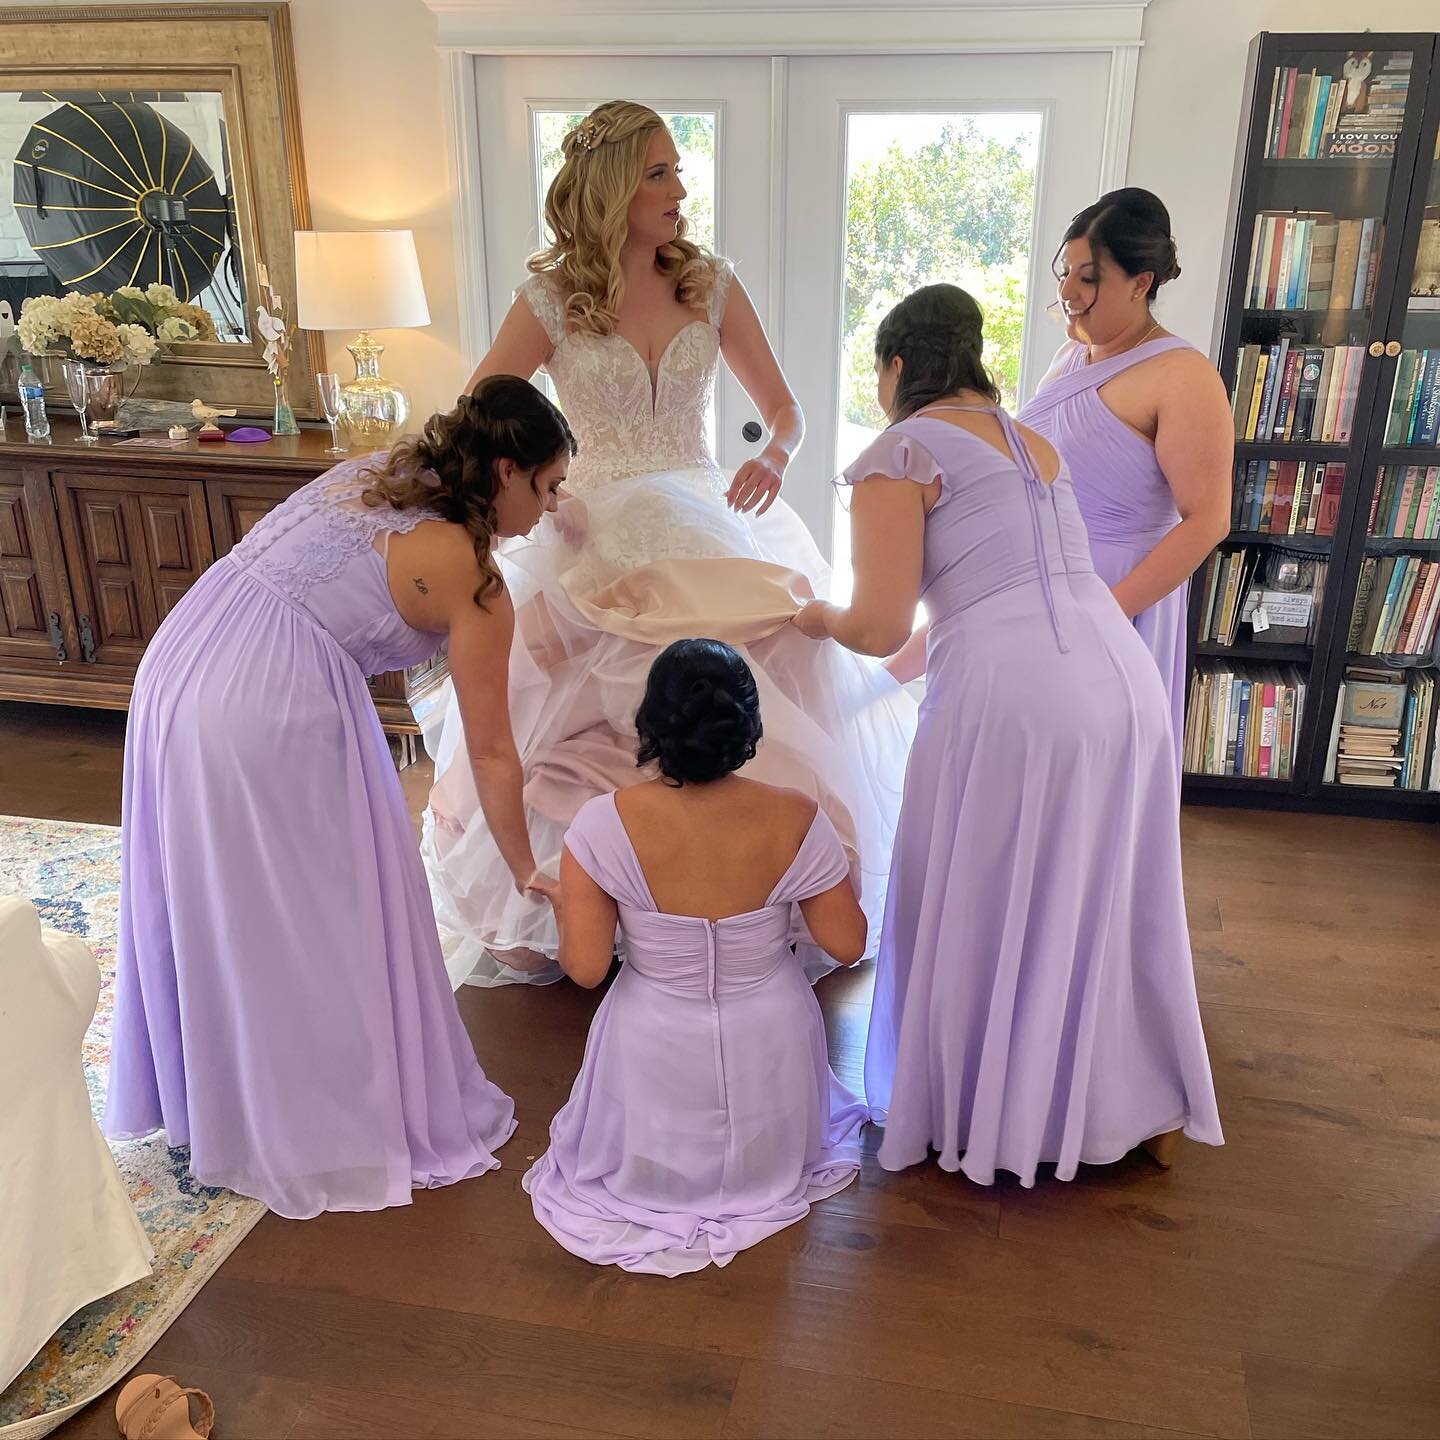 There&rsquo;s a code when you have the honor of being a brides bridesmaid for her special day! taking care of her, through thick and thin&hellip;.
.
.
#fusehair #fusehairandbeauty #fusebride #wedgewoodfallbrook #destinationwedding #socalbride #sandie